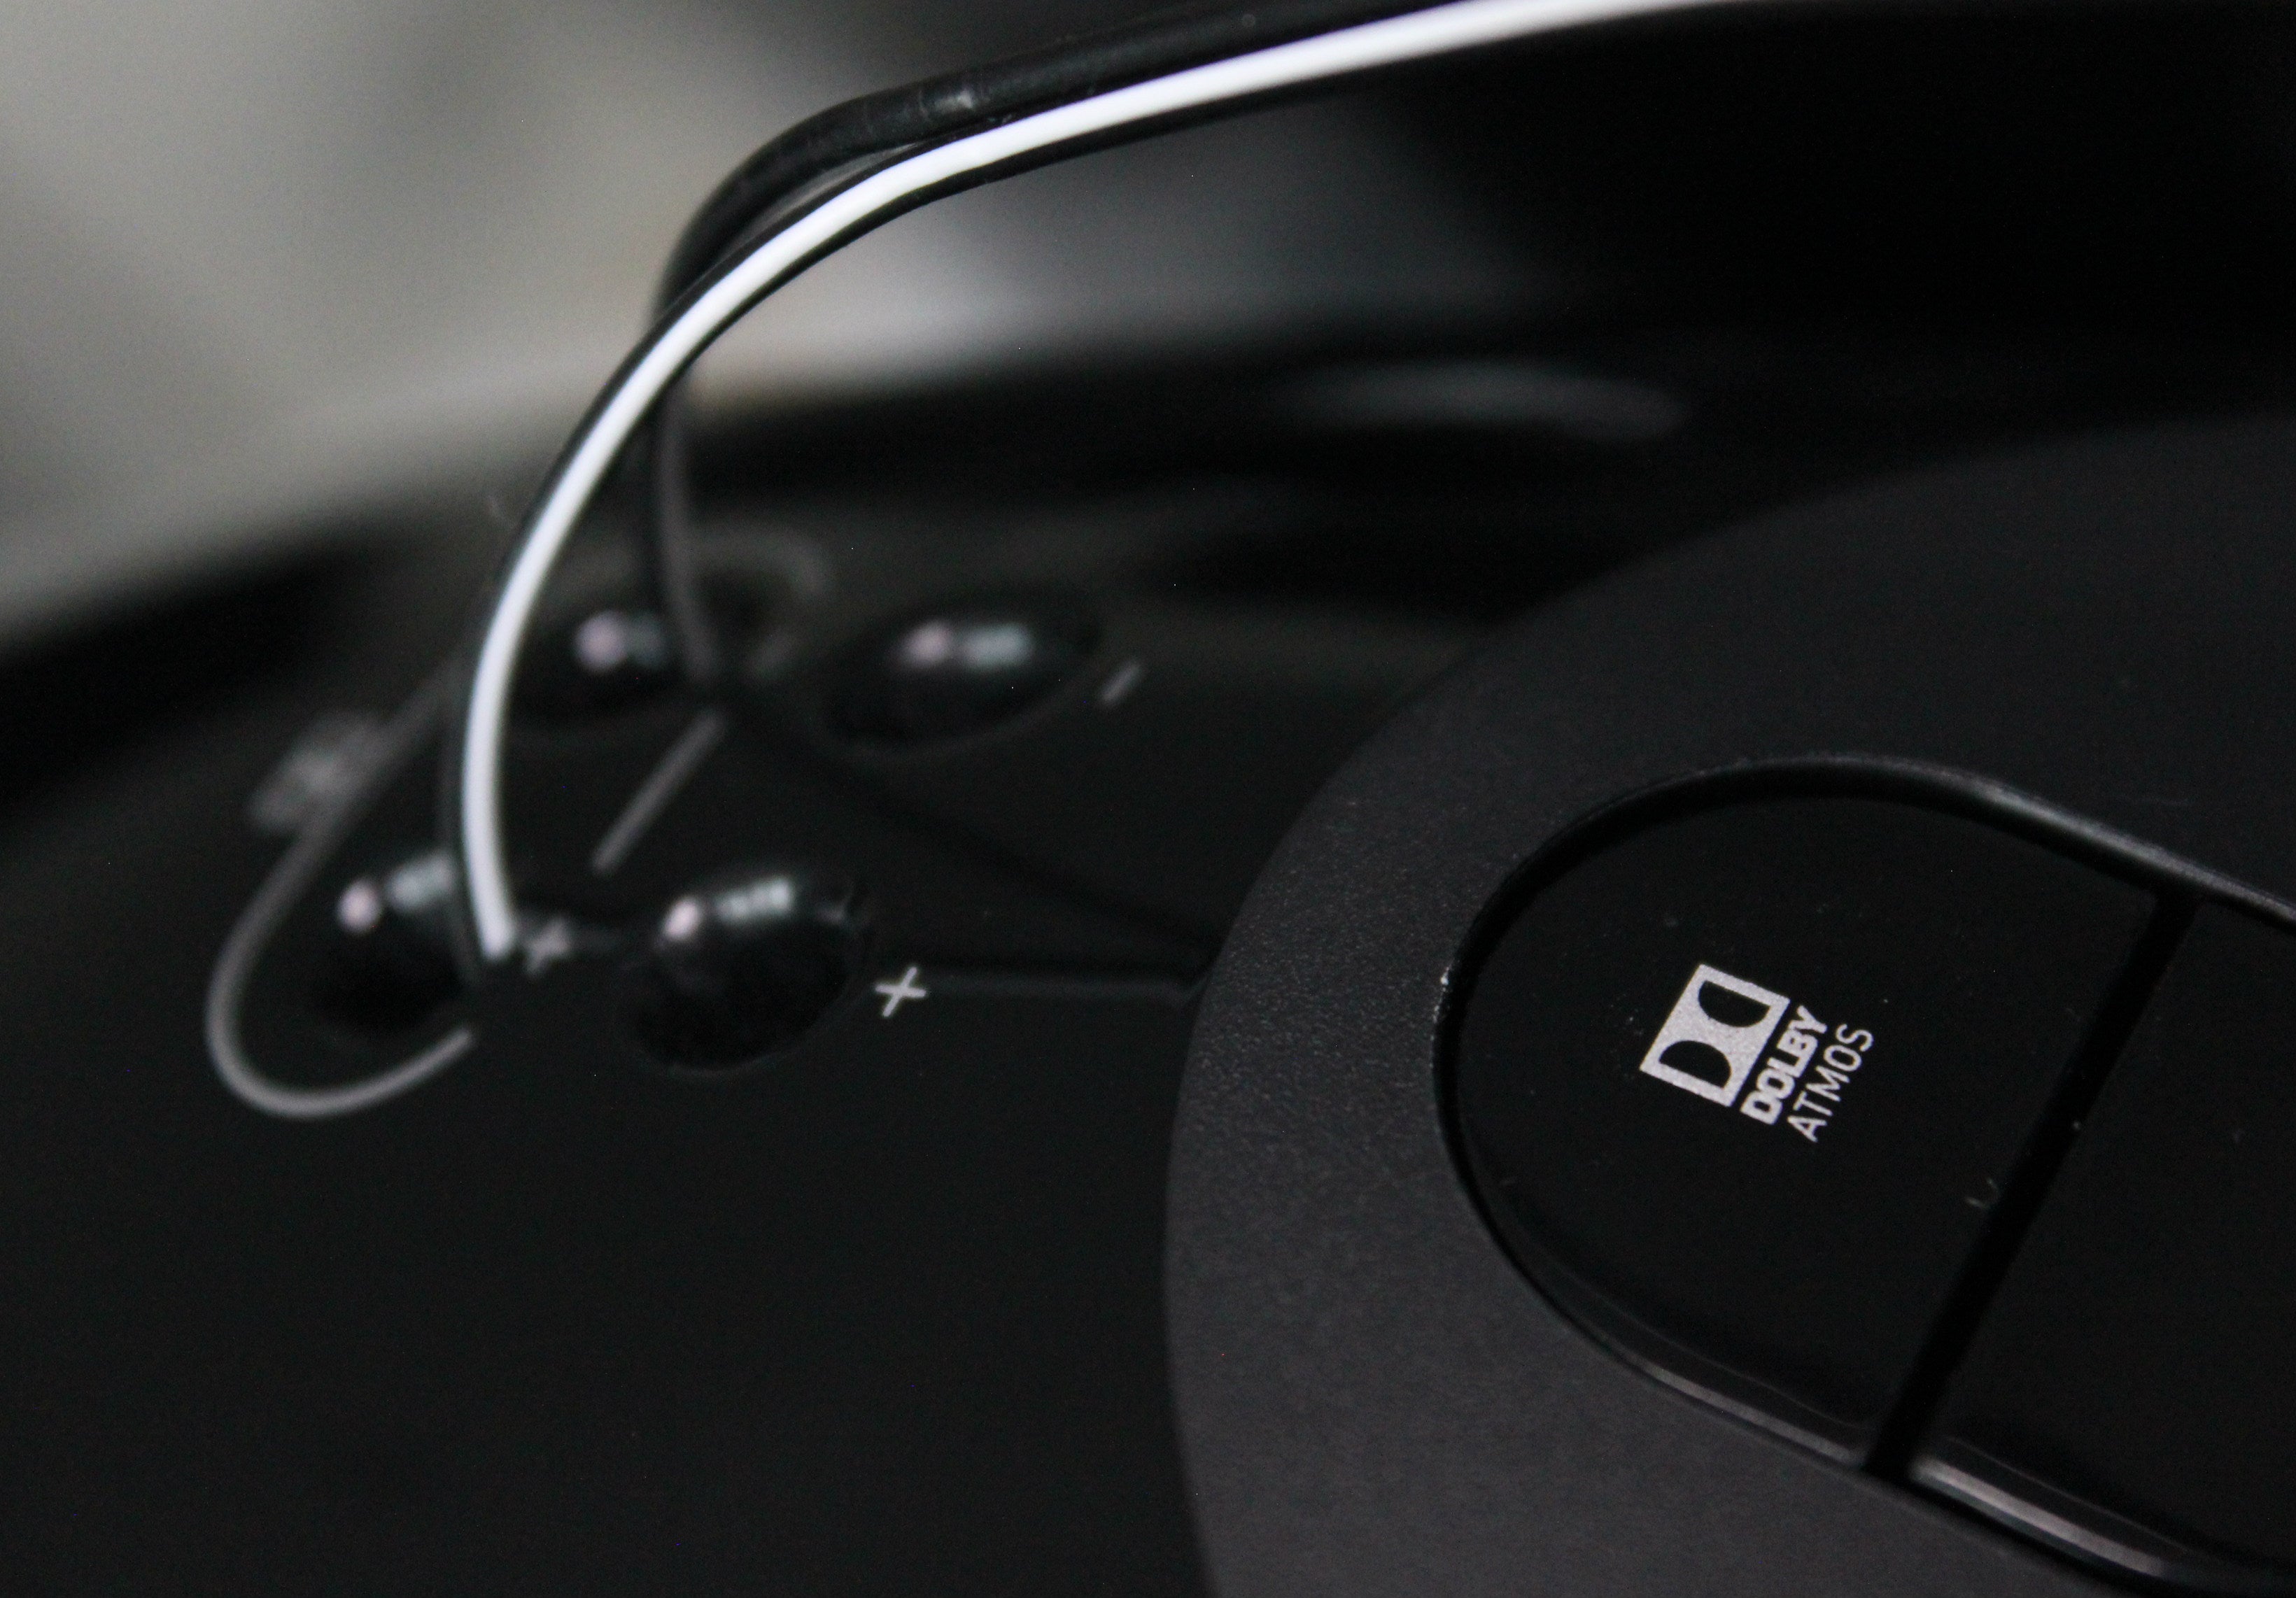 Close-up of Focal Sib Evo speaker with Dolby Atmos logo.